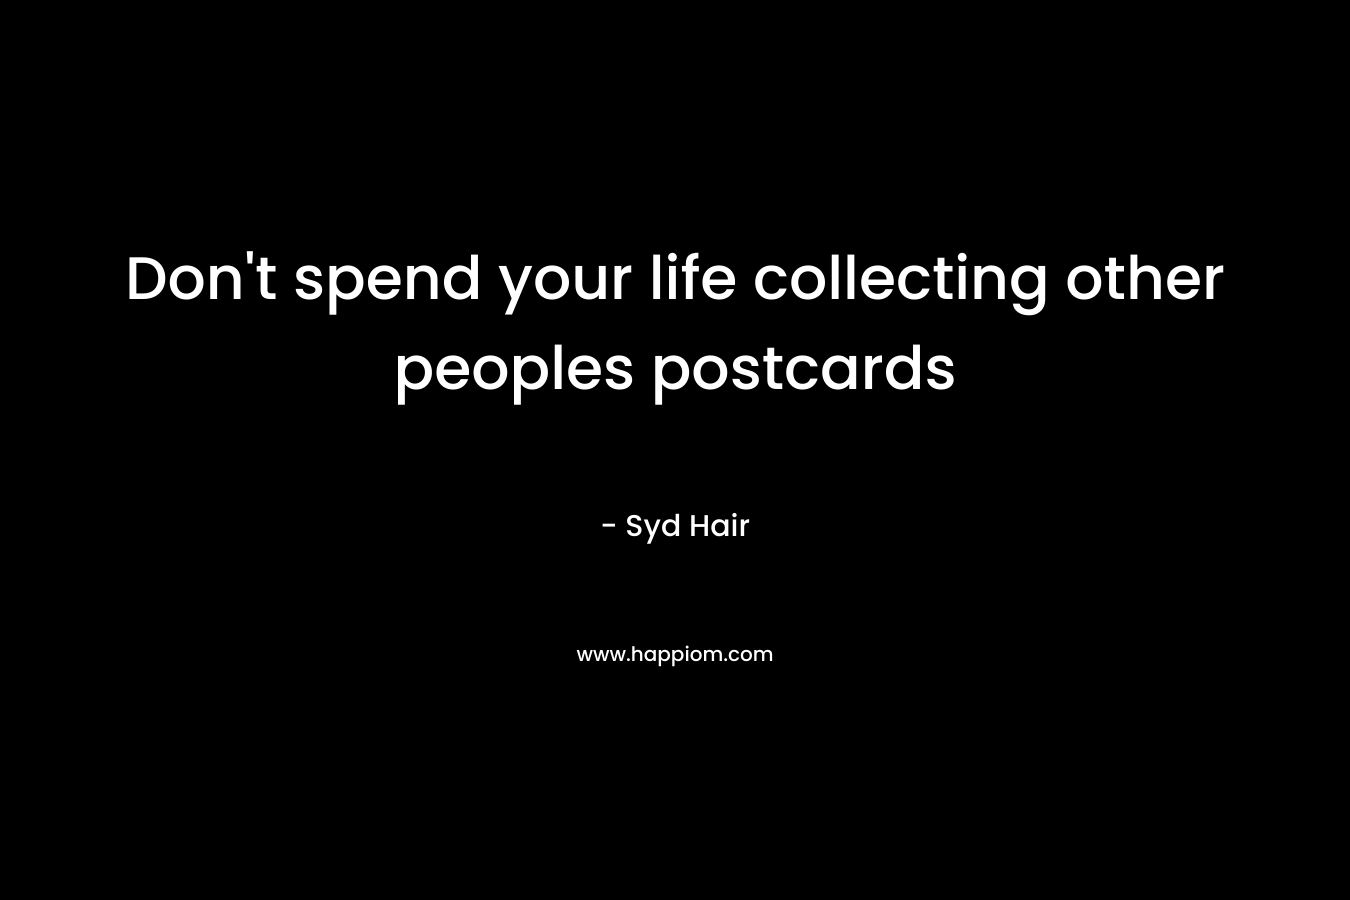 Don’t spend your life collecting other peoples postcards – Syd Hair